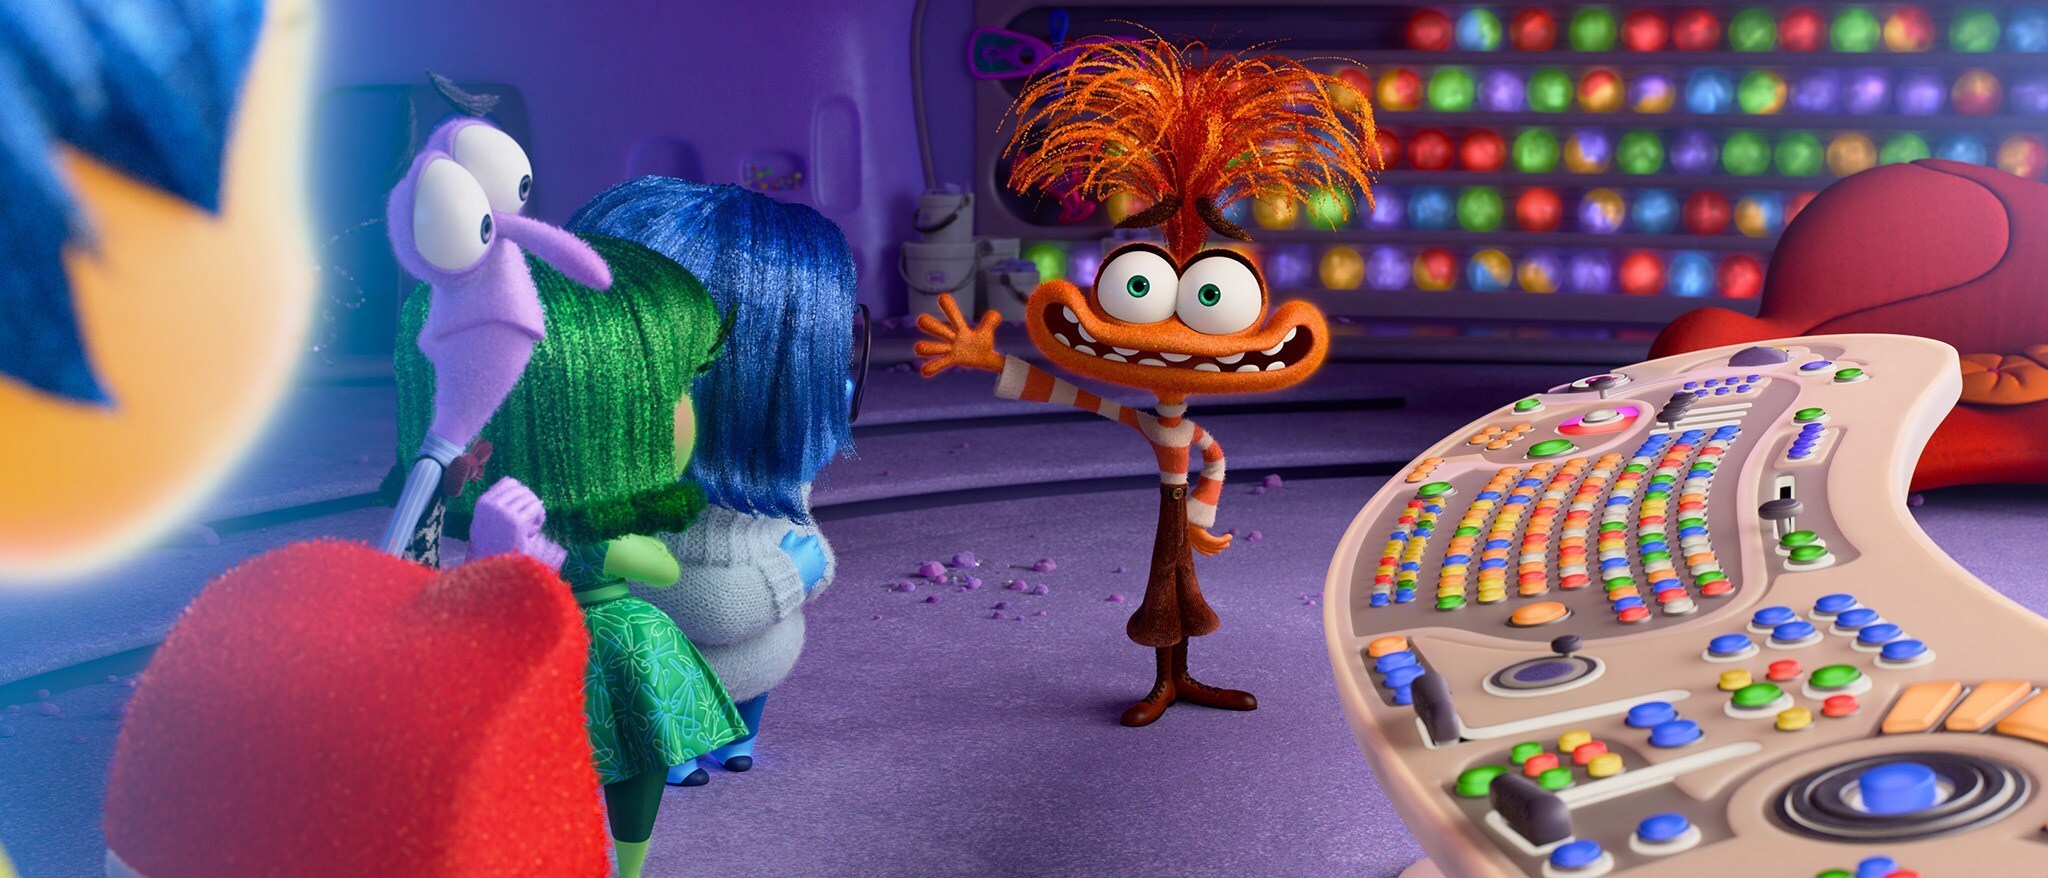 Inside Out 2 - Featured Content Banner - VN